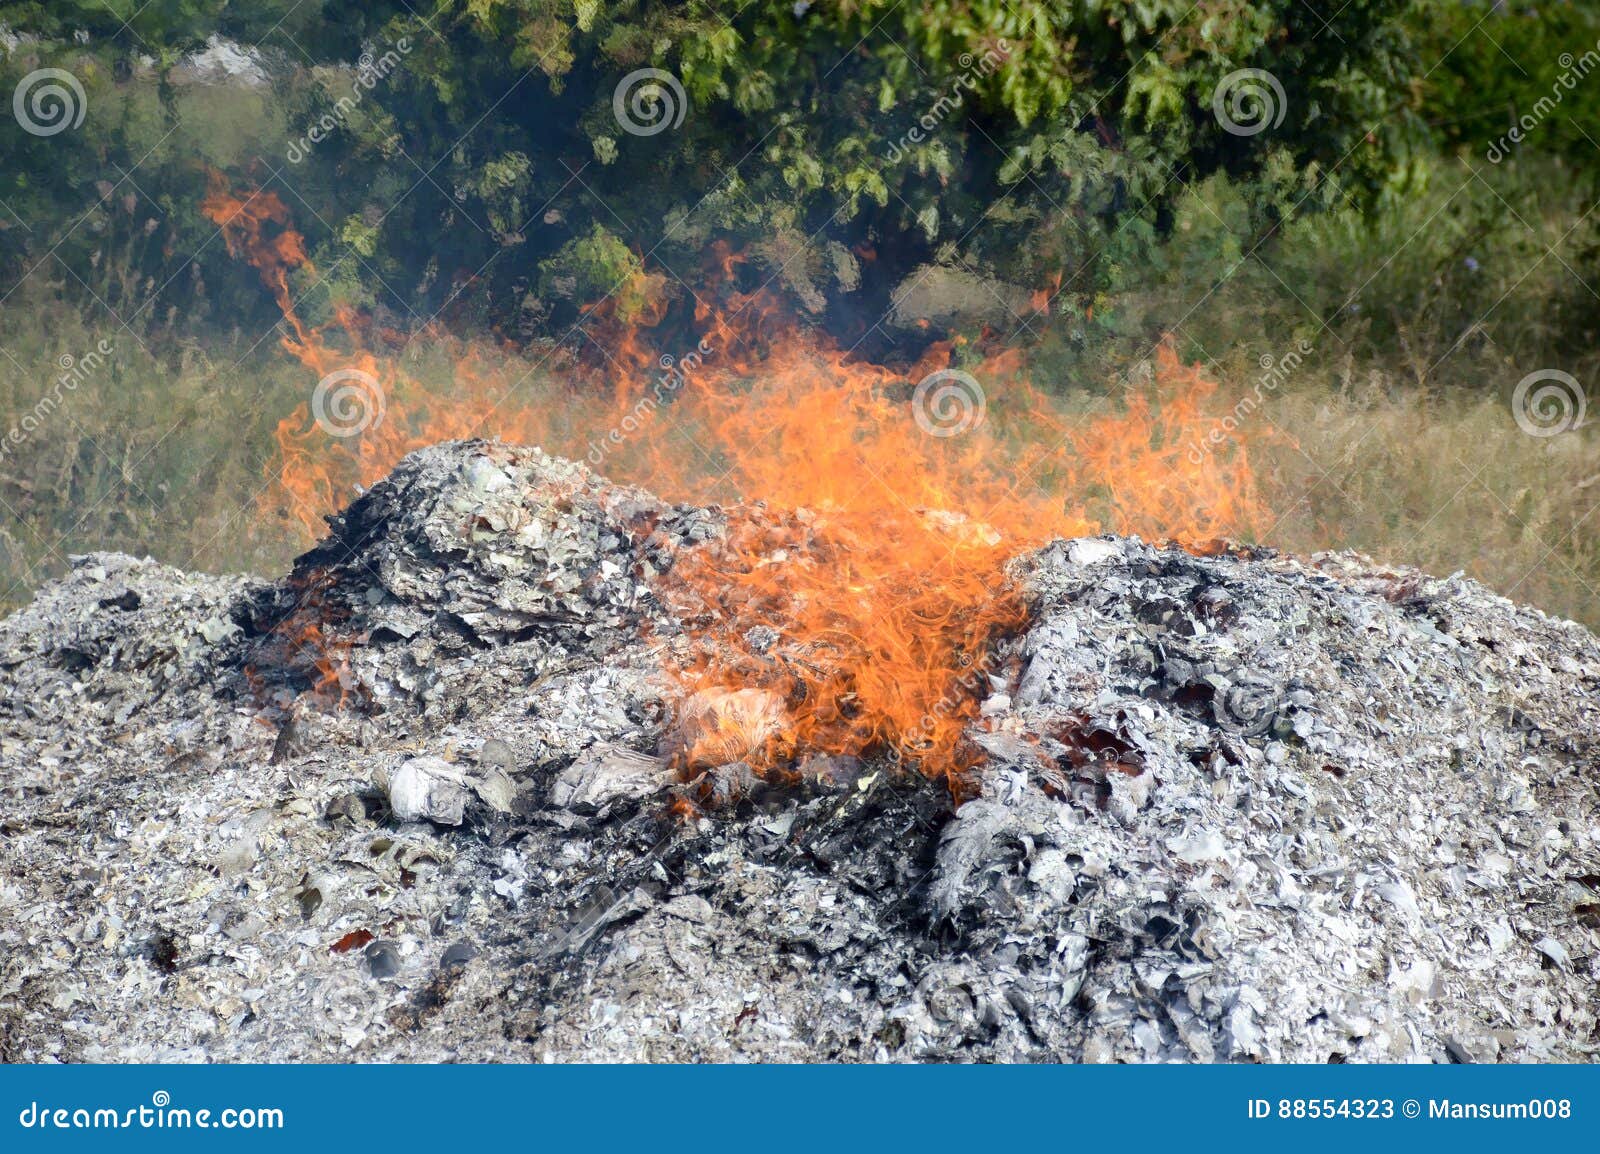 discolor Motley Clancy Fire Burning Ash in Nature Garden Stock Image - Image of dirty, outdoor:  88554323